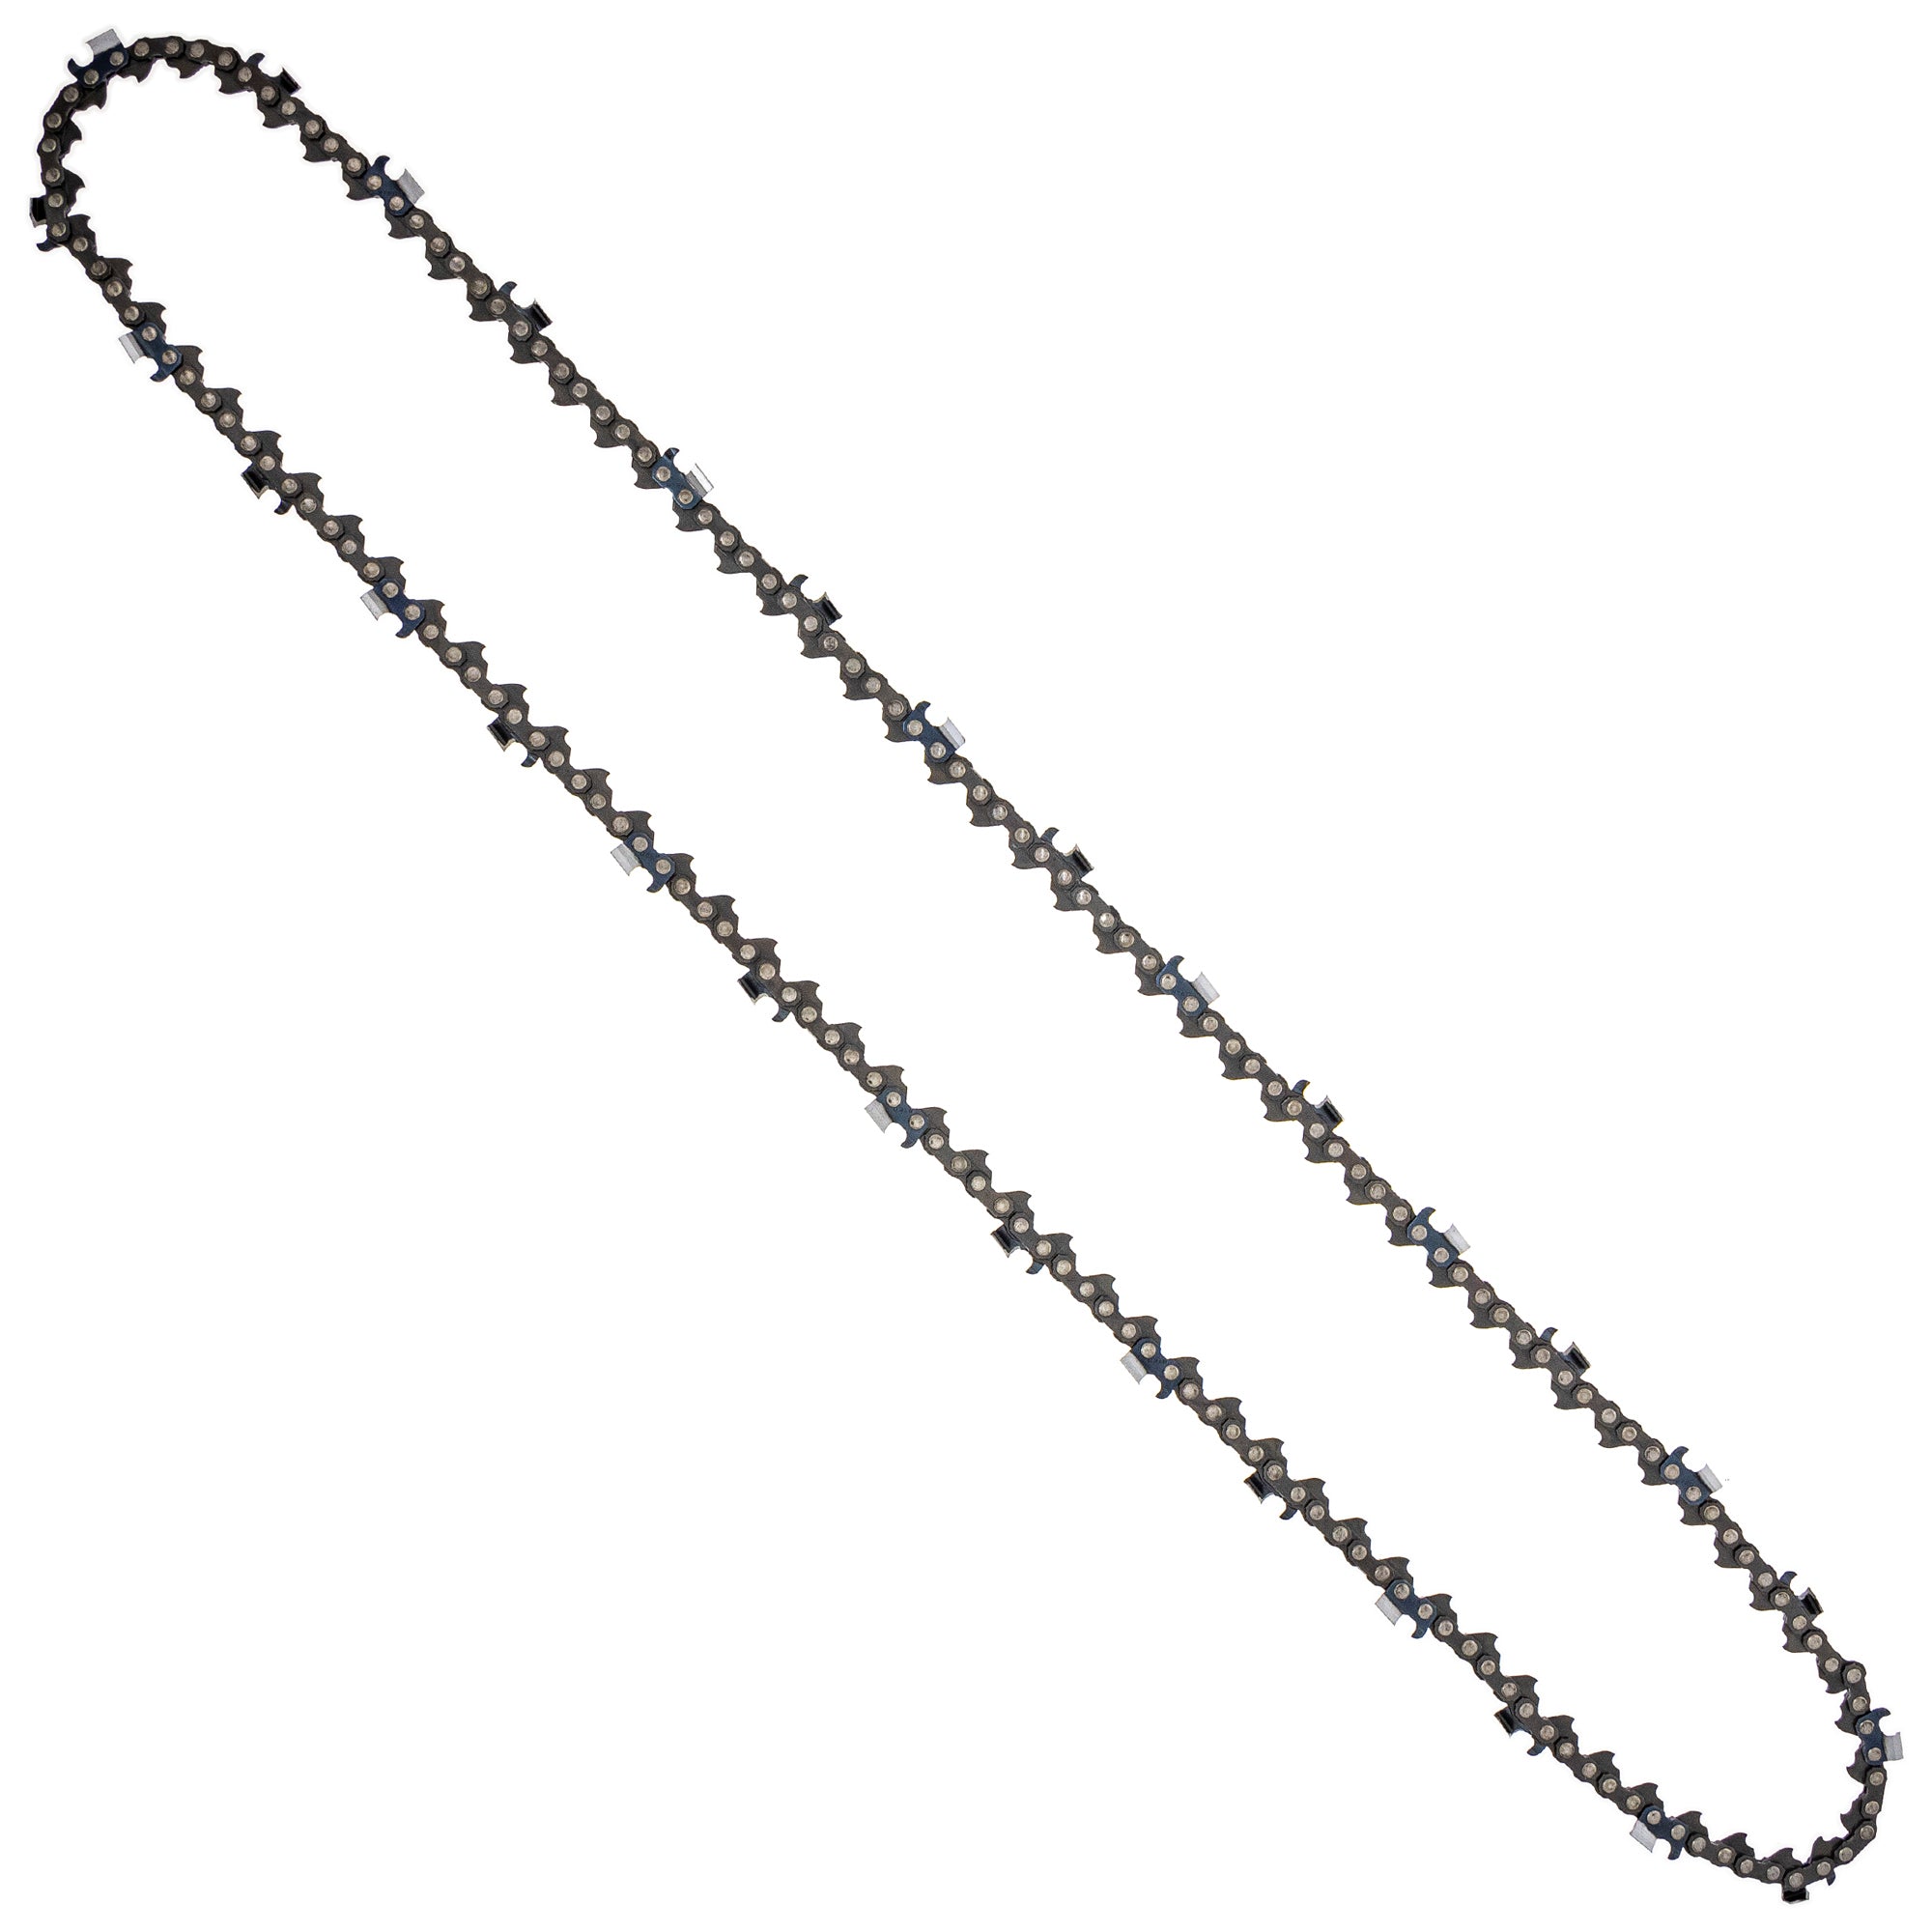 8TEN 810-CCC2207H Chain 10-Pack for zOTHER Oregon MS 066 064 056